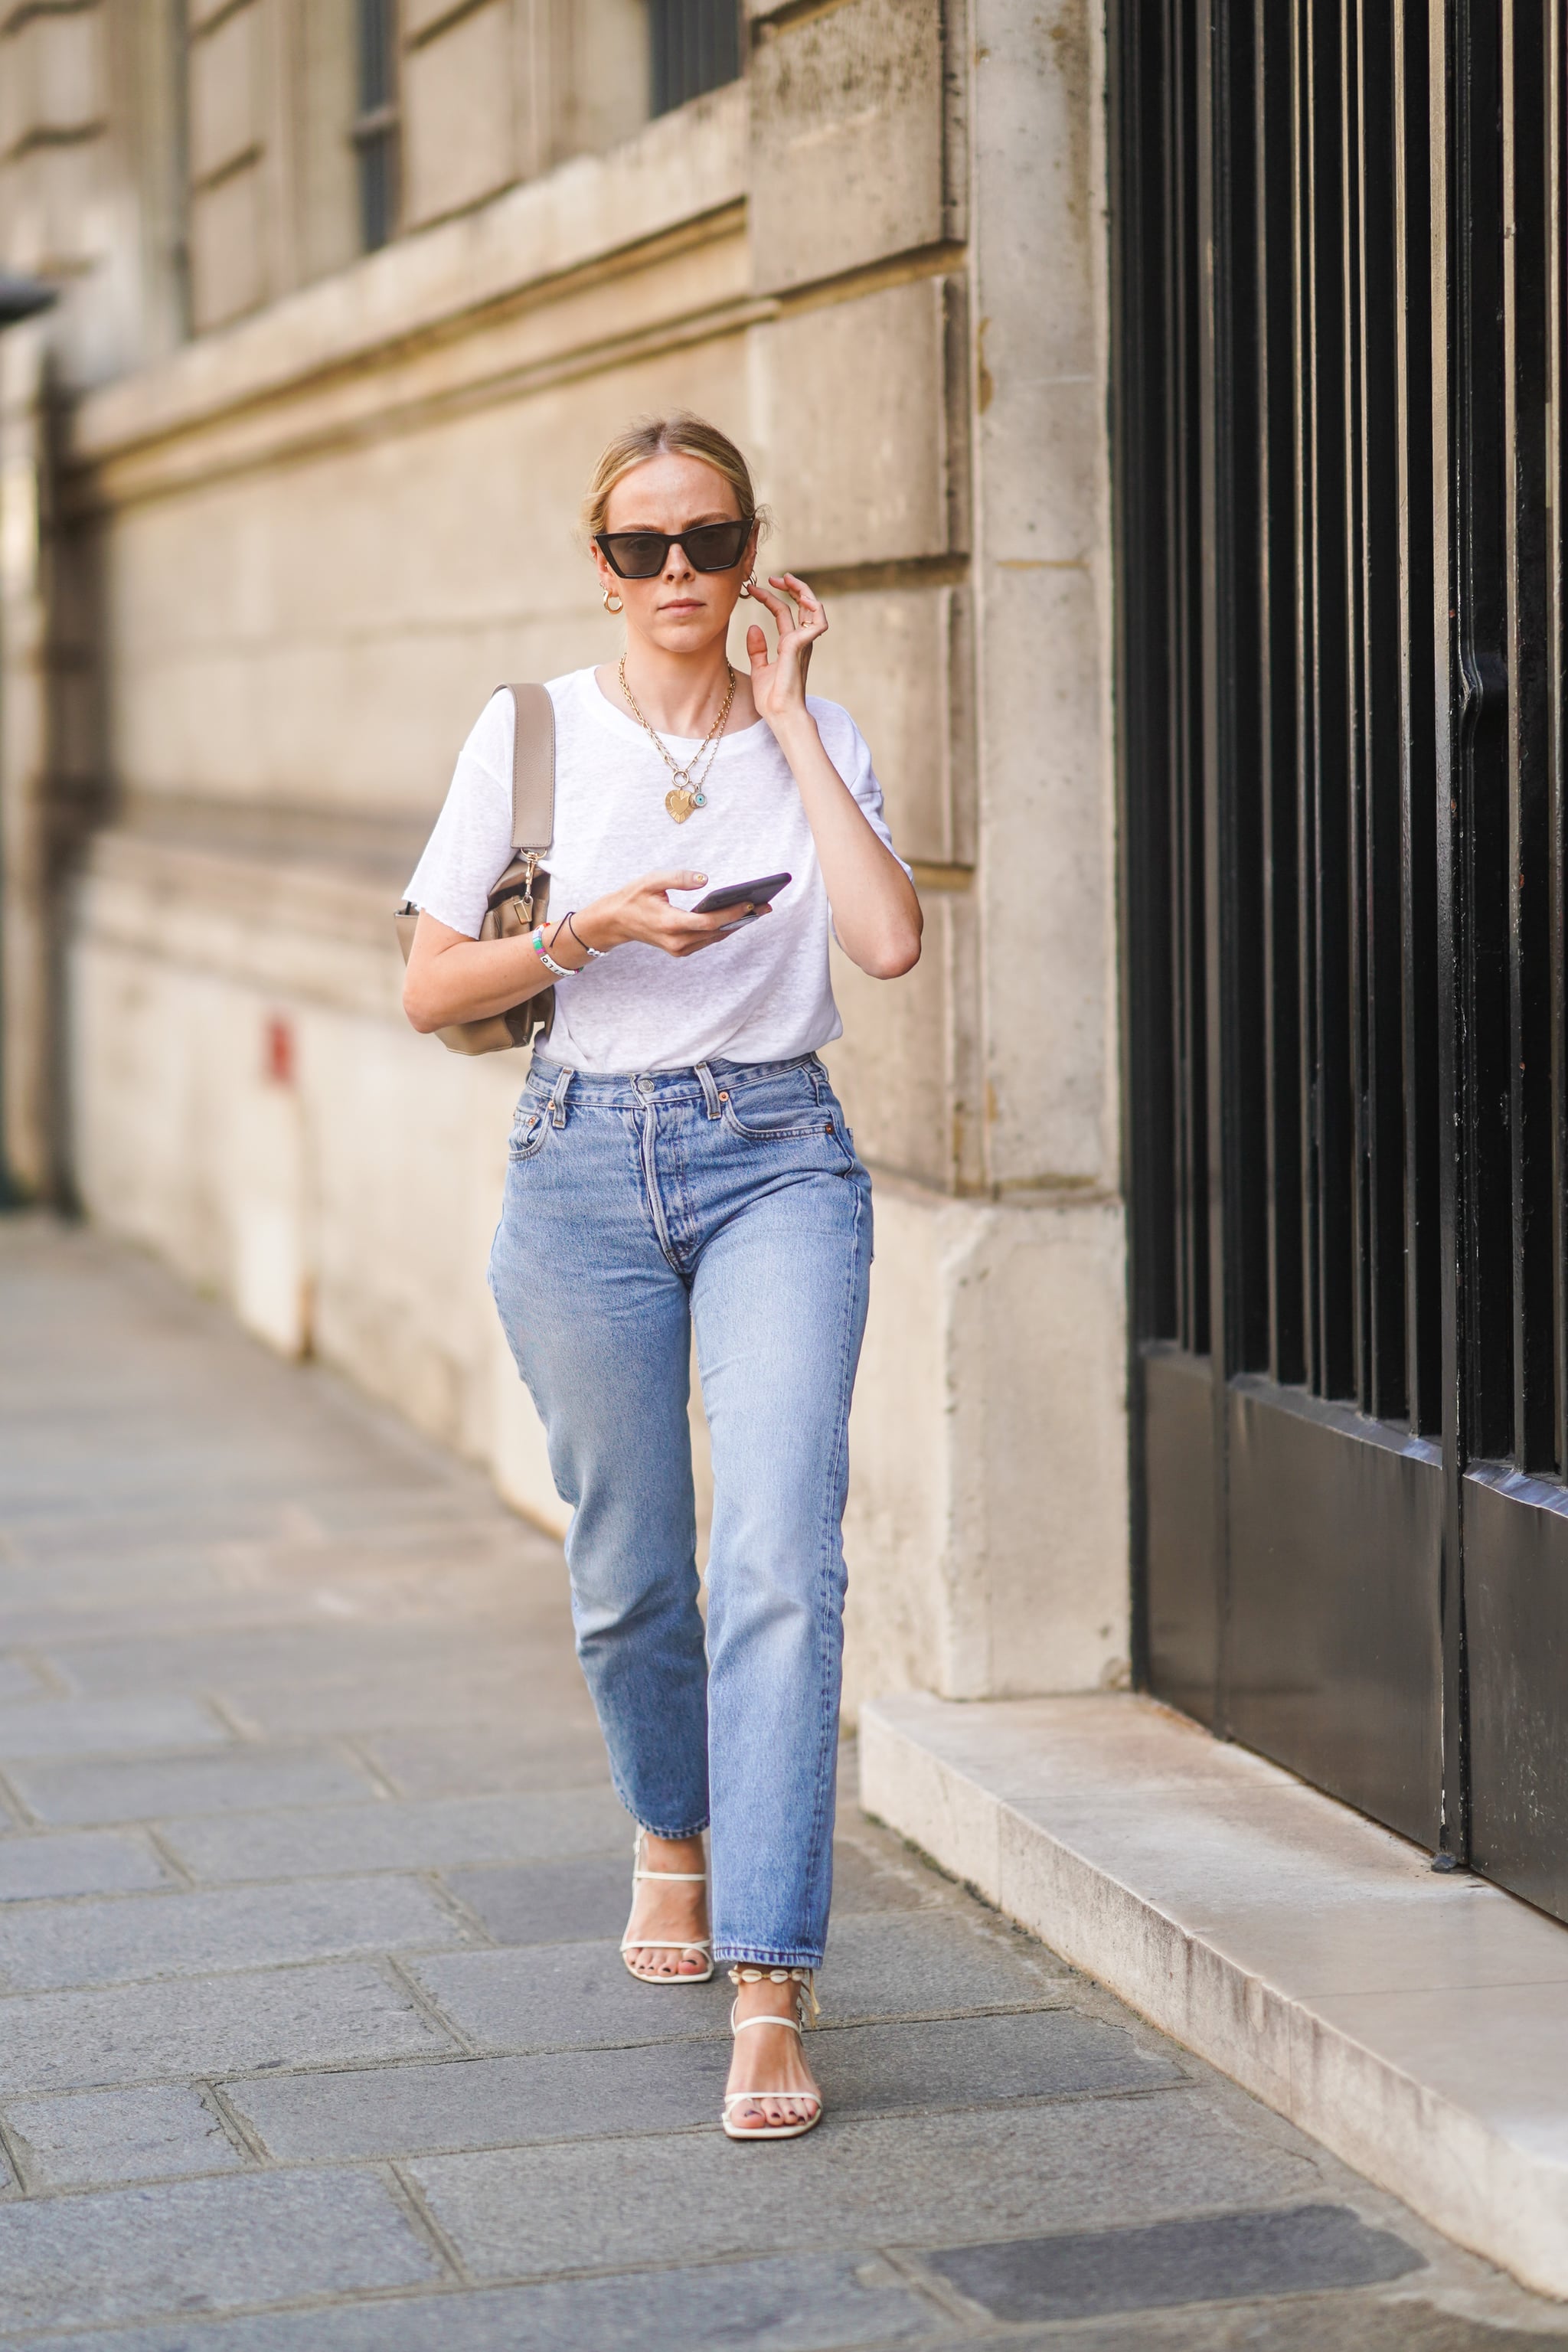 Think Simple: A White Tee, Mom Jeans, and Strappy White Sandals Make the  Perfect Look, 31 Ways to Team Up Your Jeans and Sandals For the Win